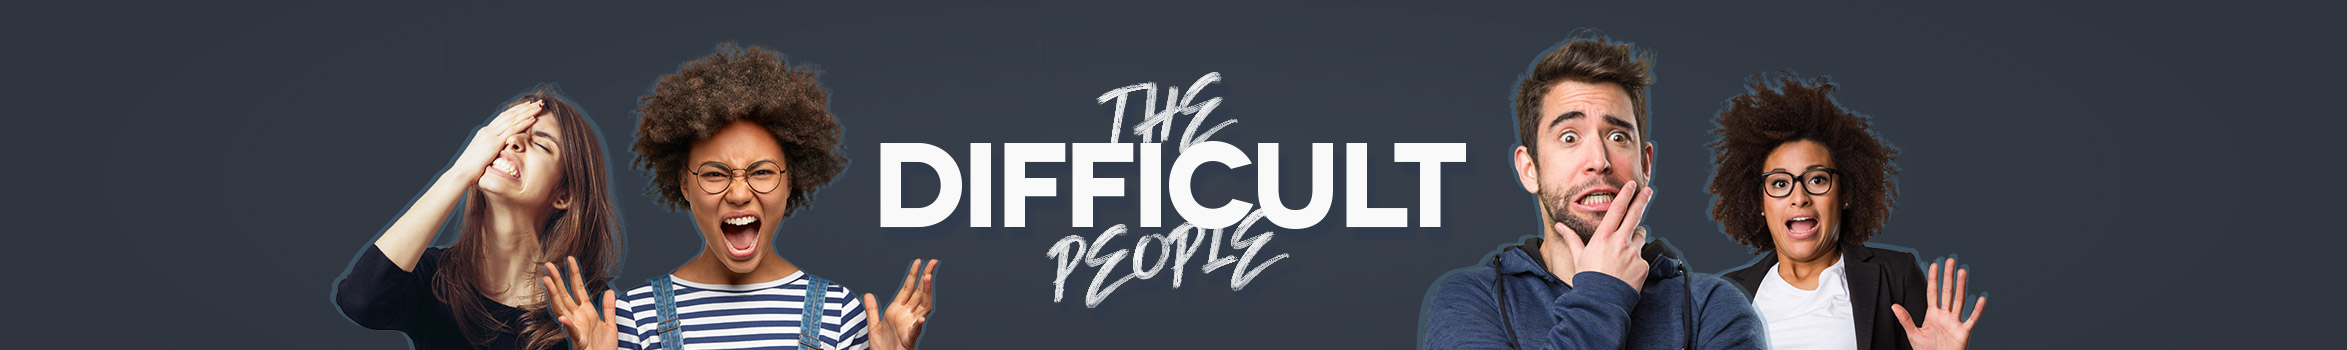 The Difficult People Banner